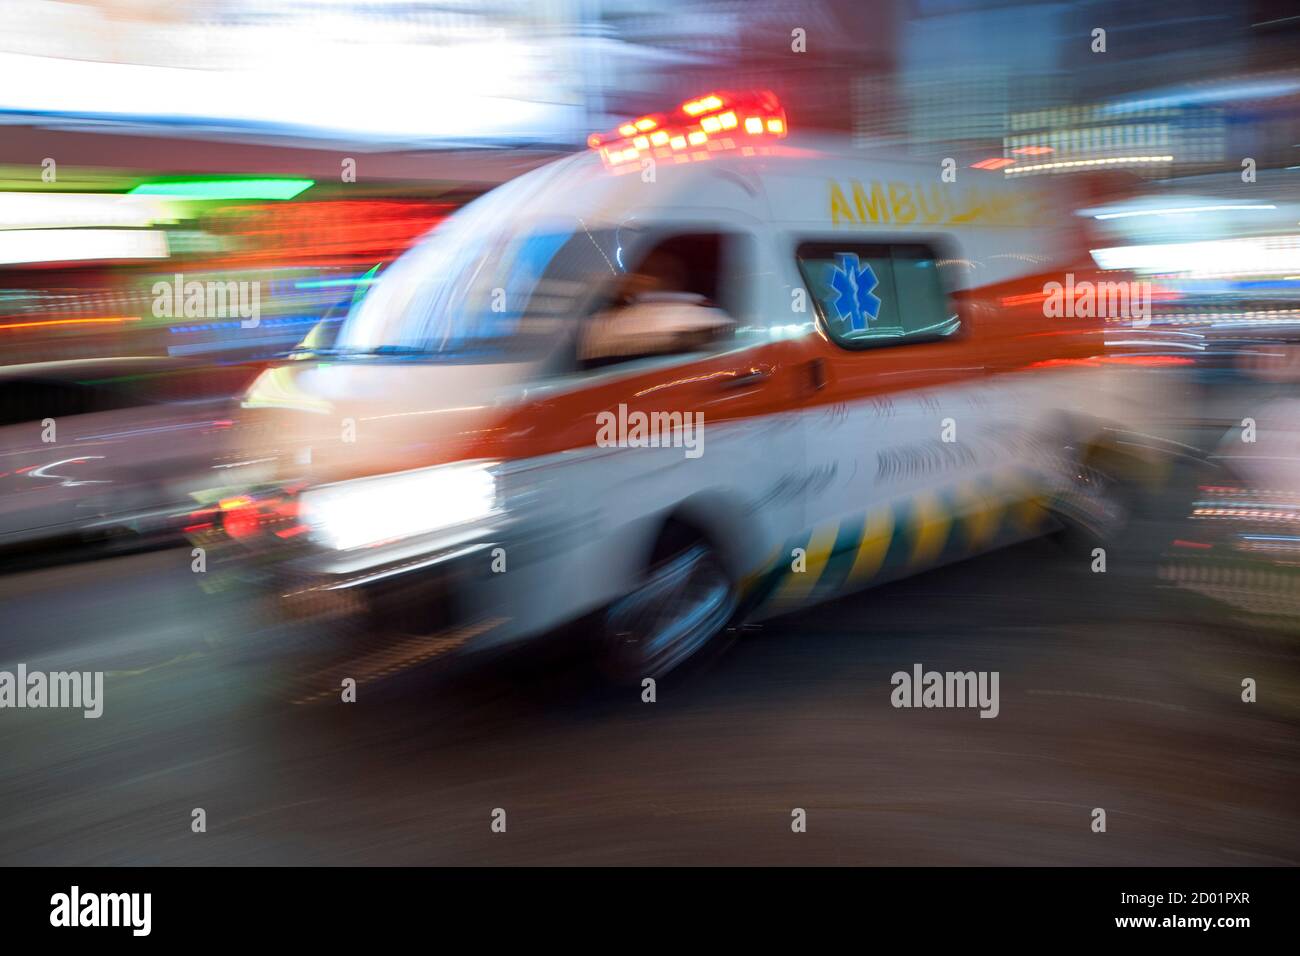 An ambulance in Cape Town, South Africa. Stock Photo